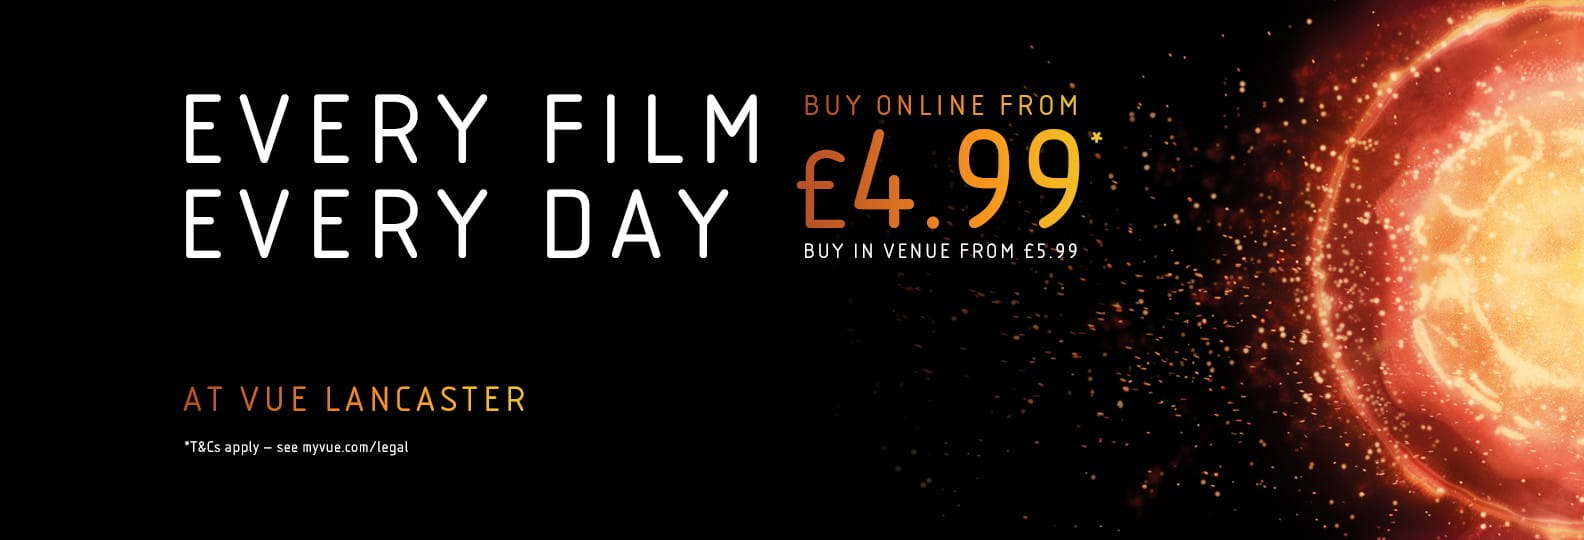 Every Day, Every Film, Every Screening from £4.99 at Vue Lancaster